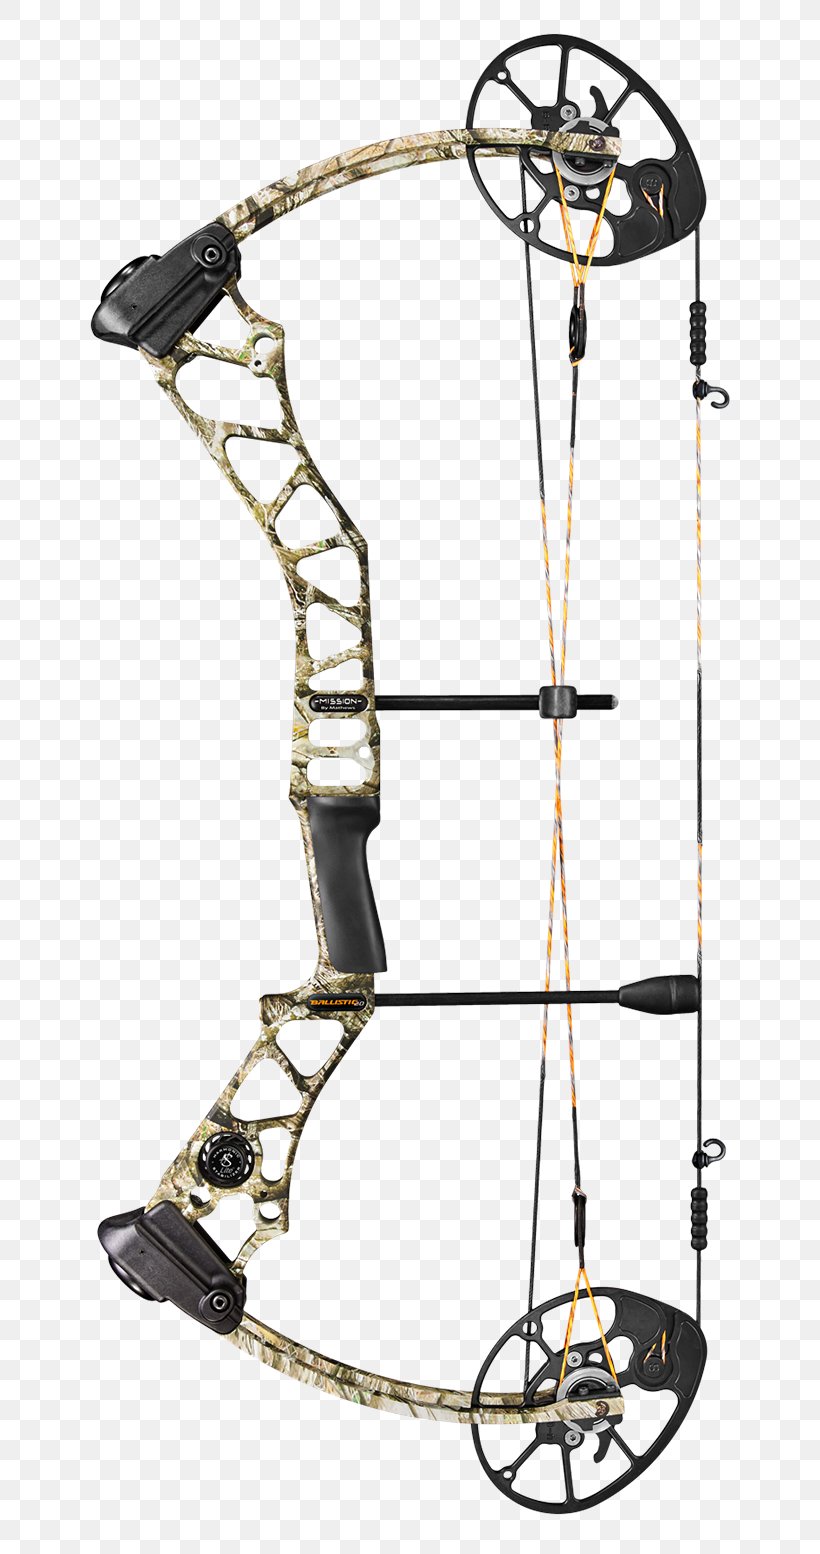 Compound Bows Archery Bow And Arrow Price Hunting, PNG, 812x1554px, Compound Bows, Archery, Bit, Bow, Bow And Arrow Download Free